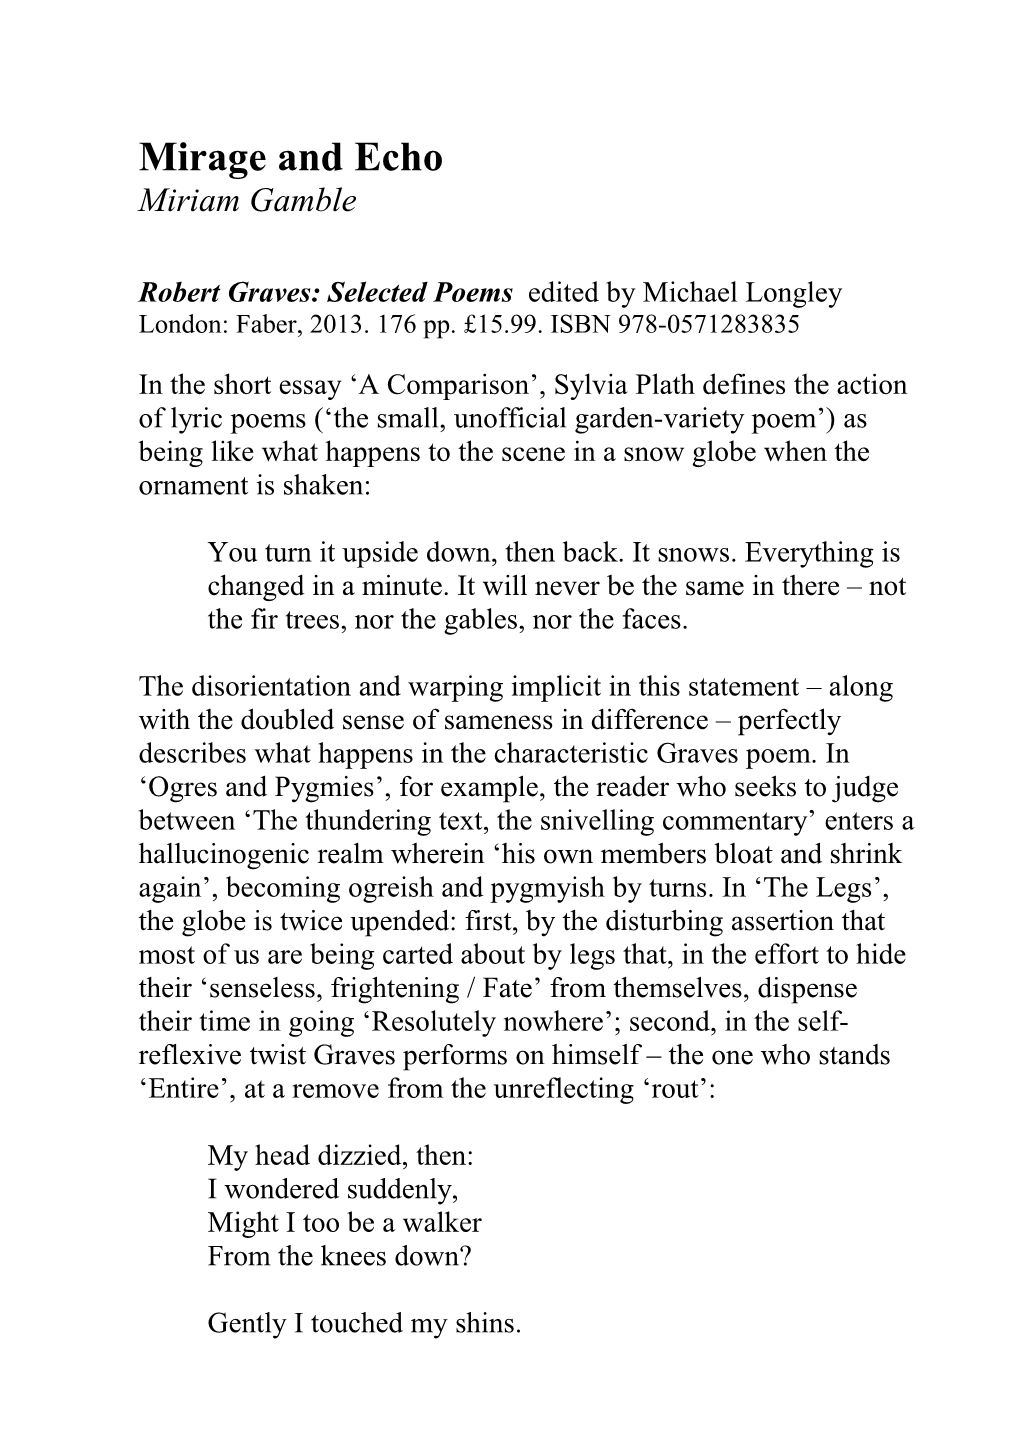 Robert Graves: Selected Poems Edited by Michael Longley